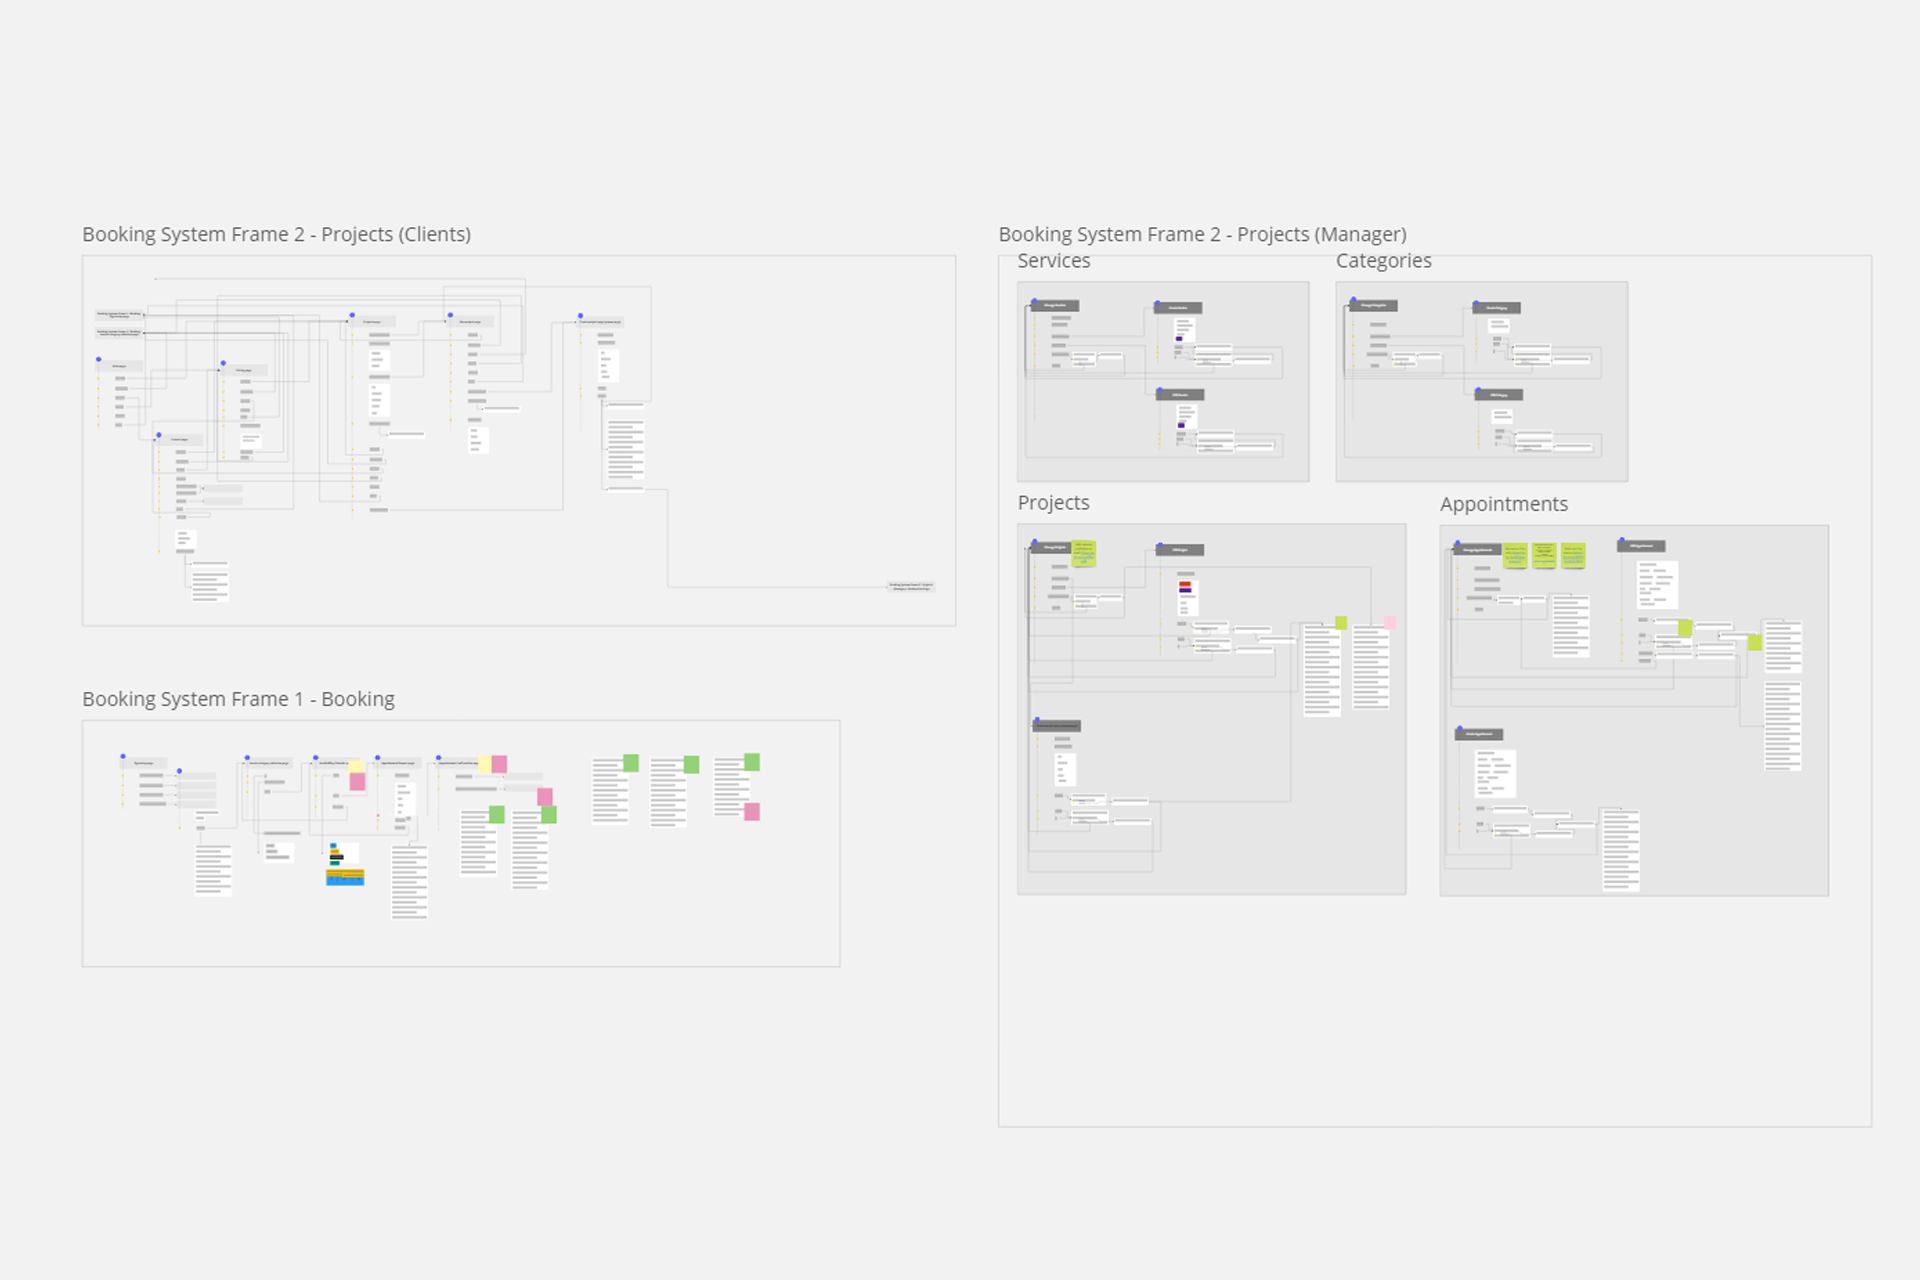 Case Study: User Flow in the Booking System Development Process